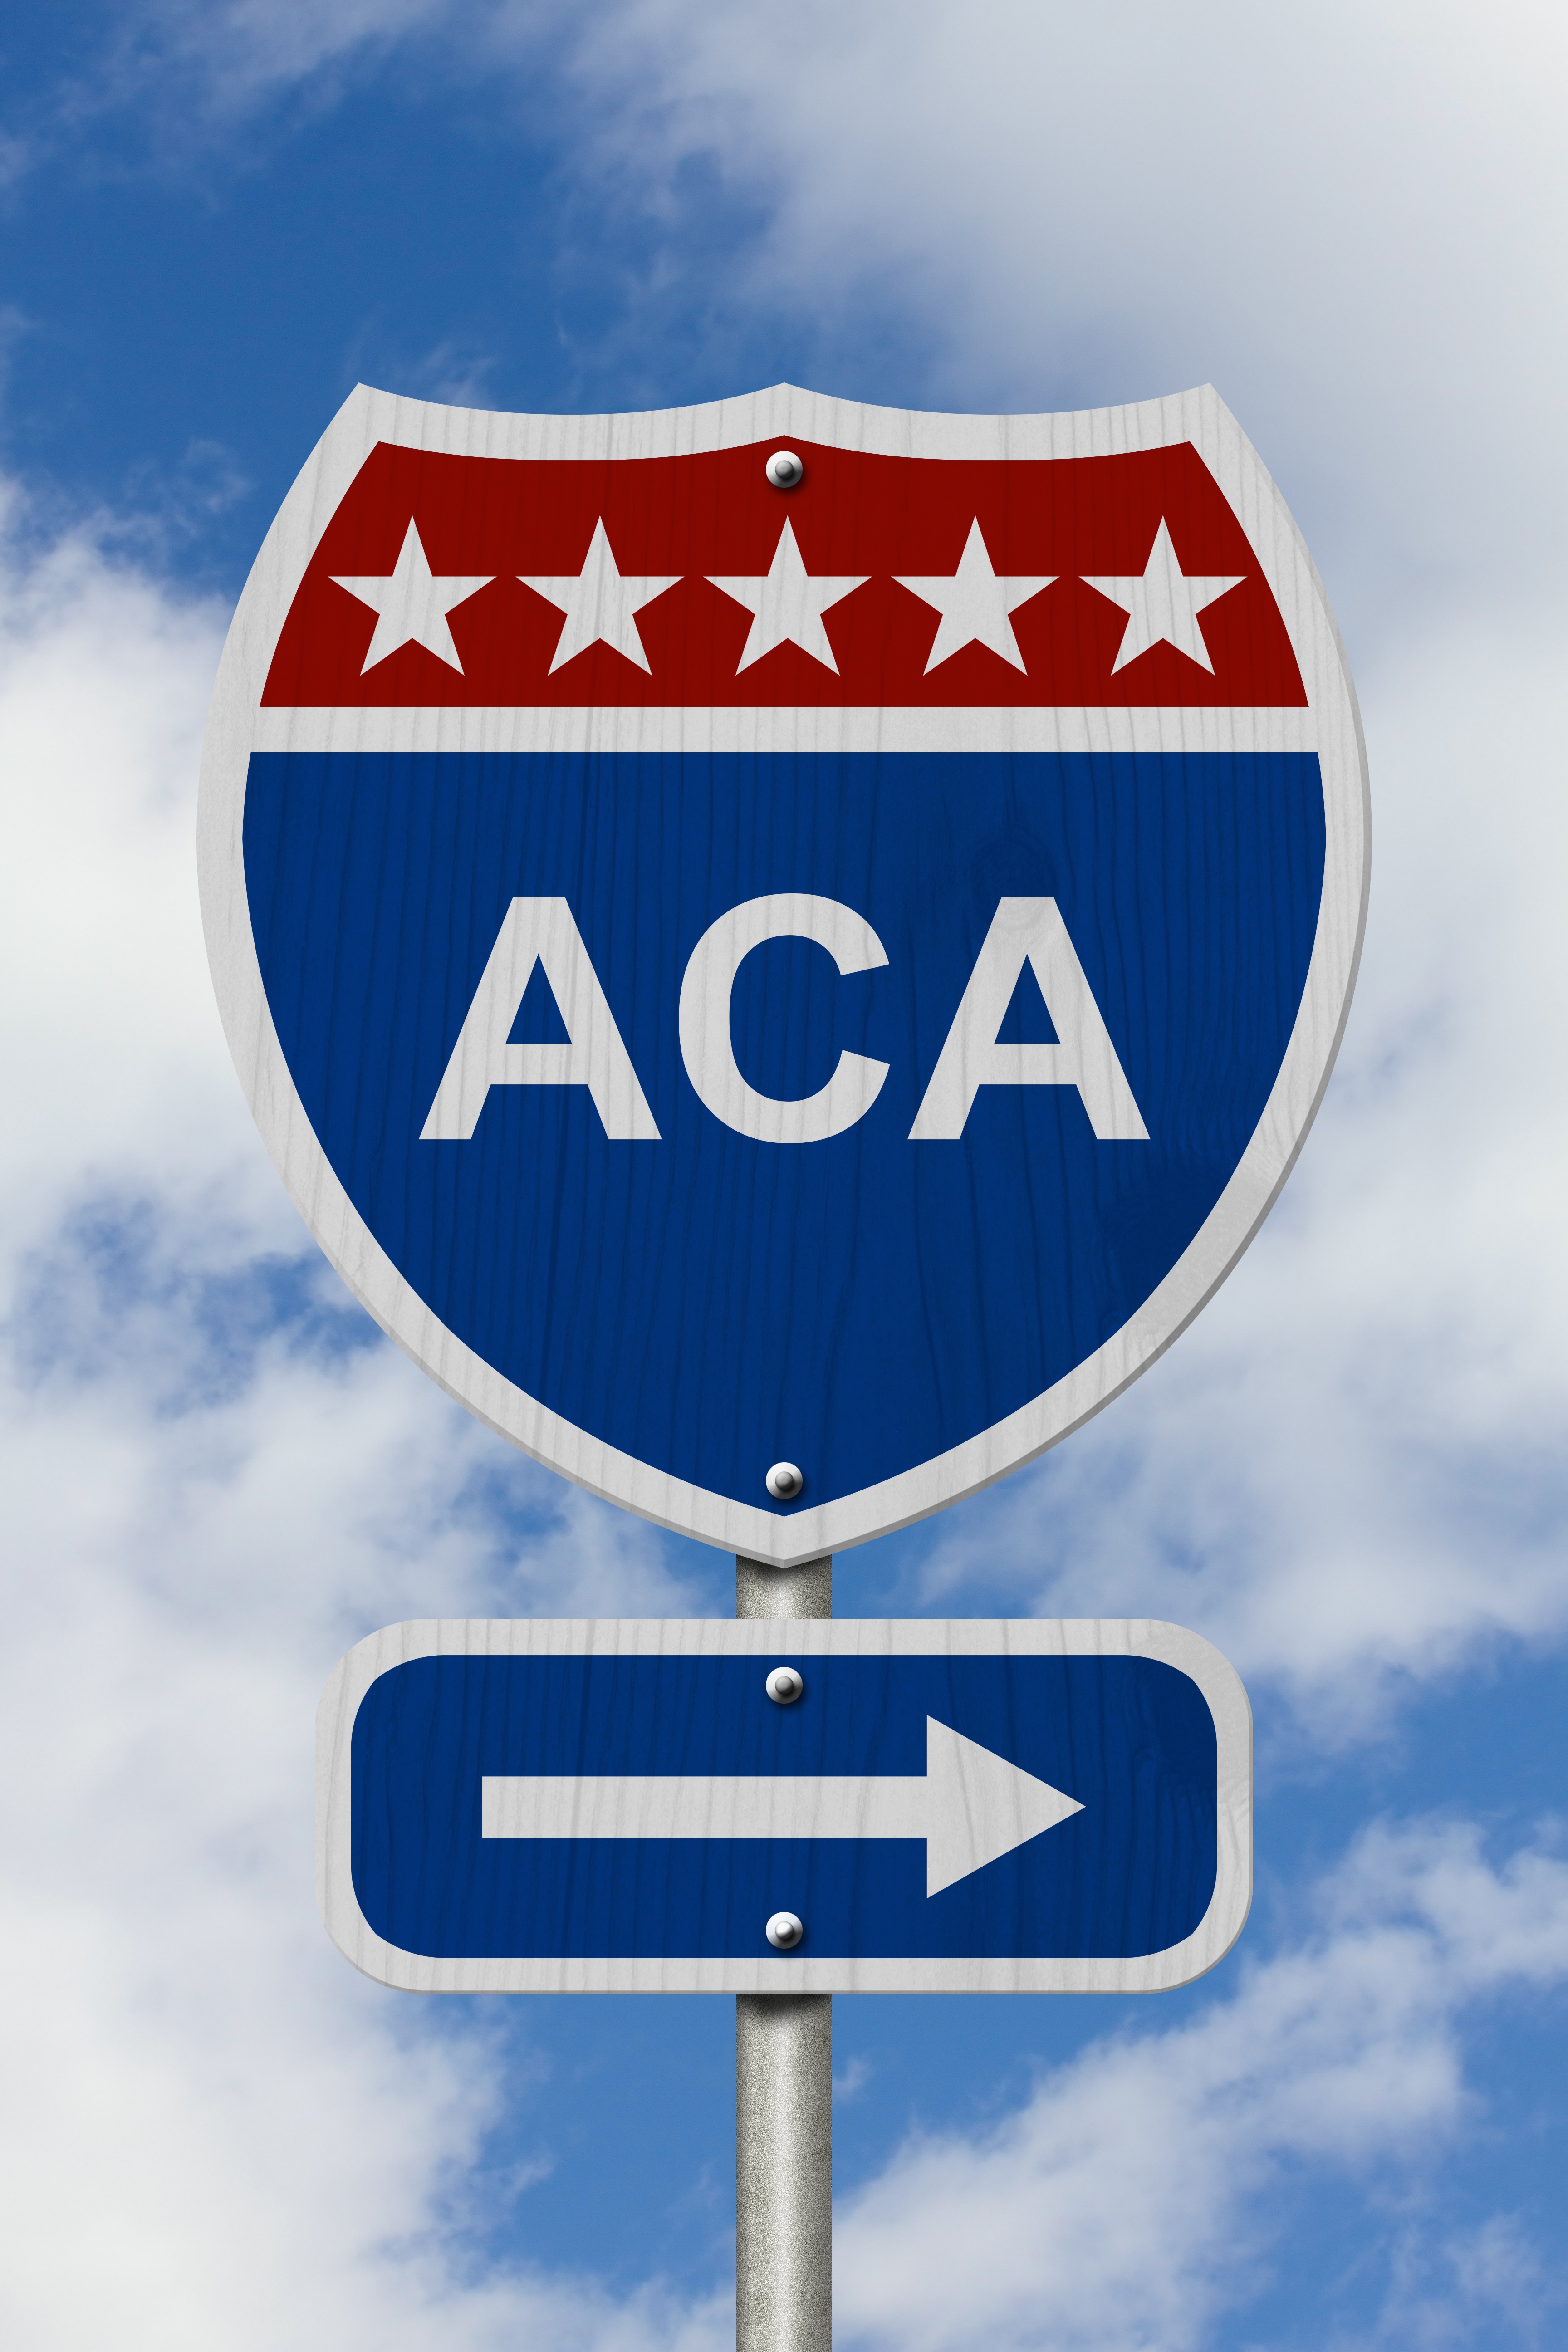 Are You Subject to the Individual Mandate?